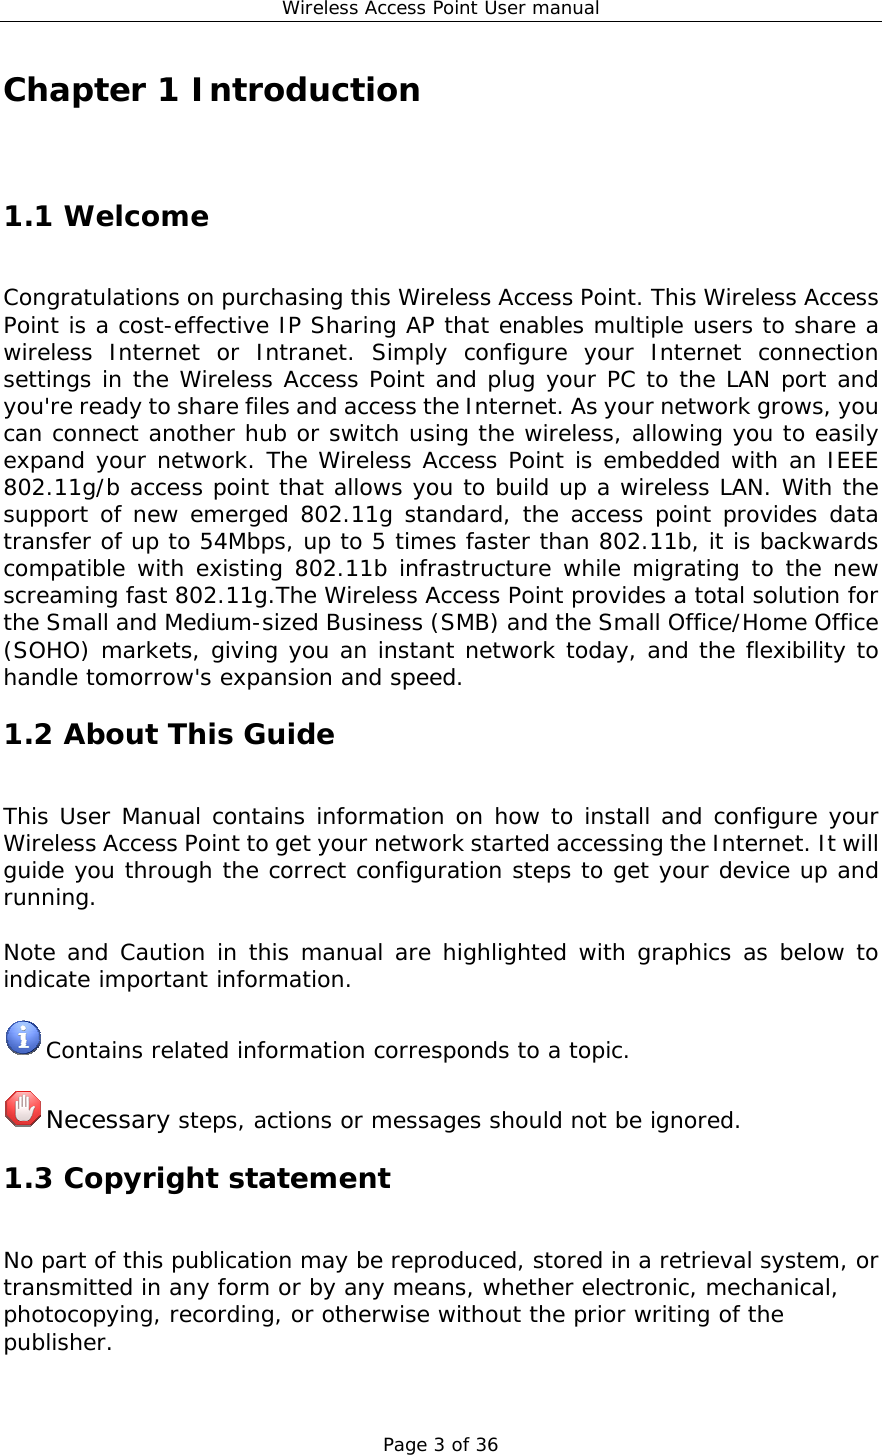 Wireless Access Point User manual Page 3 of 36 Chapter 1 Introduction 1.1 Welcome Congratulations on purchasing this Wireless Access Point. This Wireless Access Point is a cost-effective IP Sharing AP that enables multiple users to share a wireless Internet or Intranet. Simply configure your Internet connection settings in the Wireless Access Point and plug your PC to the LAN port and you&apos;re ready to share files and access the Internet. As your network grows, you can connect another hub or switch using the wireless, allowing you to easily expand your network. The Wireless Access Point is embedded with an IEEE 802.11g/b access point that allows you to build up a wireless LAN. With the support of new emerged 802.11g standard, the access point provides data transfer of up to 54Mbps, up to 5 times faster than 802.11b, it is backwards compatible with existing 802.11b infrastructure while migrating to the new screaming fast 802.11g.The Wireless Access Point provides a total solution for the Small and Medium-sized Business (SMB) and the Small Office/Home Office (SOHO) markets, giving you an instant network today, and the flexibility to handle tomorrow&apos;s expansion and speed. 1.2 About This Guide This User Manual contains information on how to install and configure your Wireless Access Point to get your network started accessing the Internet. It will guide you through the correct configuration steps to get your device up and running.  Note and Caution in this manual are highlighted with graphics as below to indicate important information.   Contains related information corresponds to a topic.   Necessary steps, actions or messages should not be ignored. 1.3 Copyright statement No part of this publication may be reproduced, stored in a retrieval system, or transmitted in any form or by any means, whether electronic, mechanical, photocopying, recording, or otherwise without the prior writing of the publisher. 